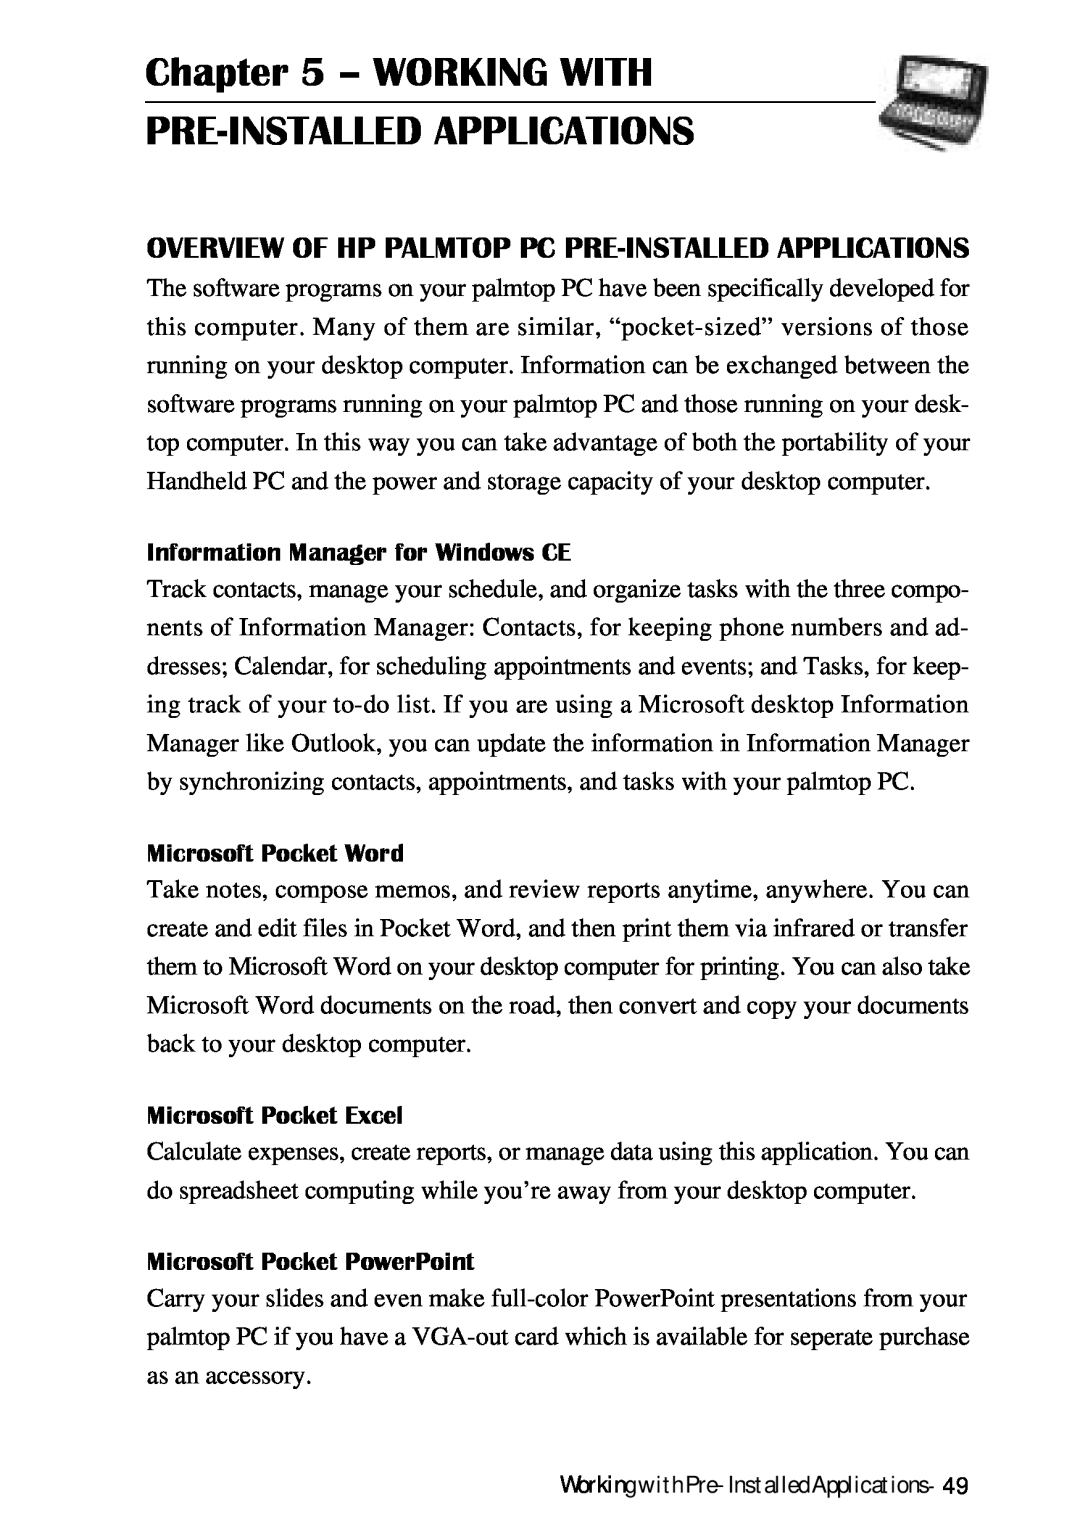 HP Palmtop 620X manual Working With Pre-Installed Applications, Information Manager for Windows CE, Microsoft Pocket Word 